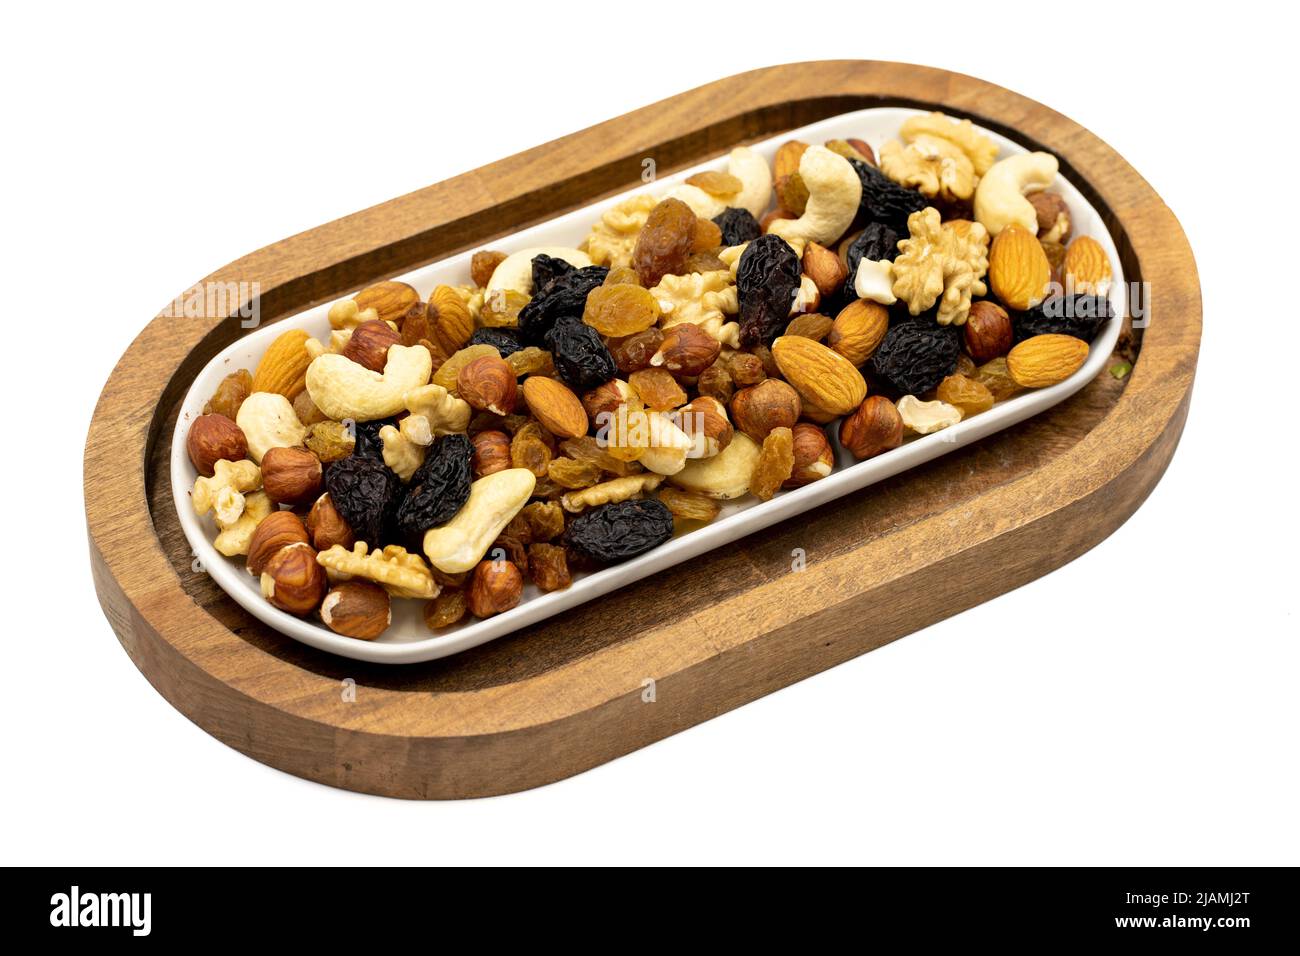 Mixed nuts on white background. Nuts, walnuts, raisins and cashews. close up Stock Photo